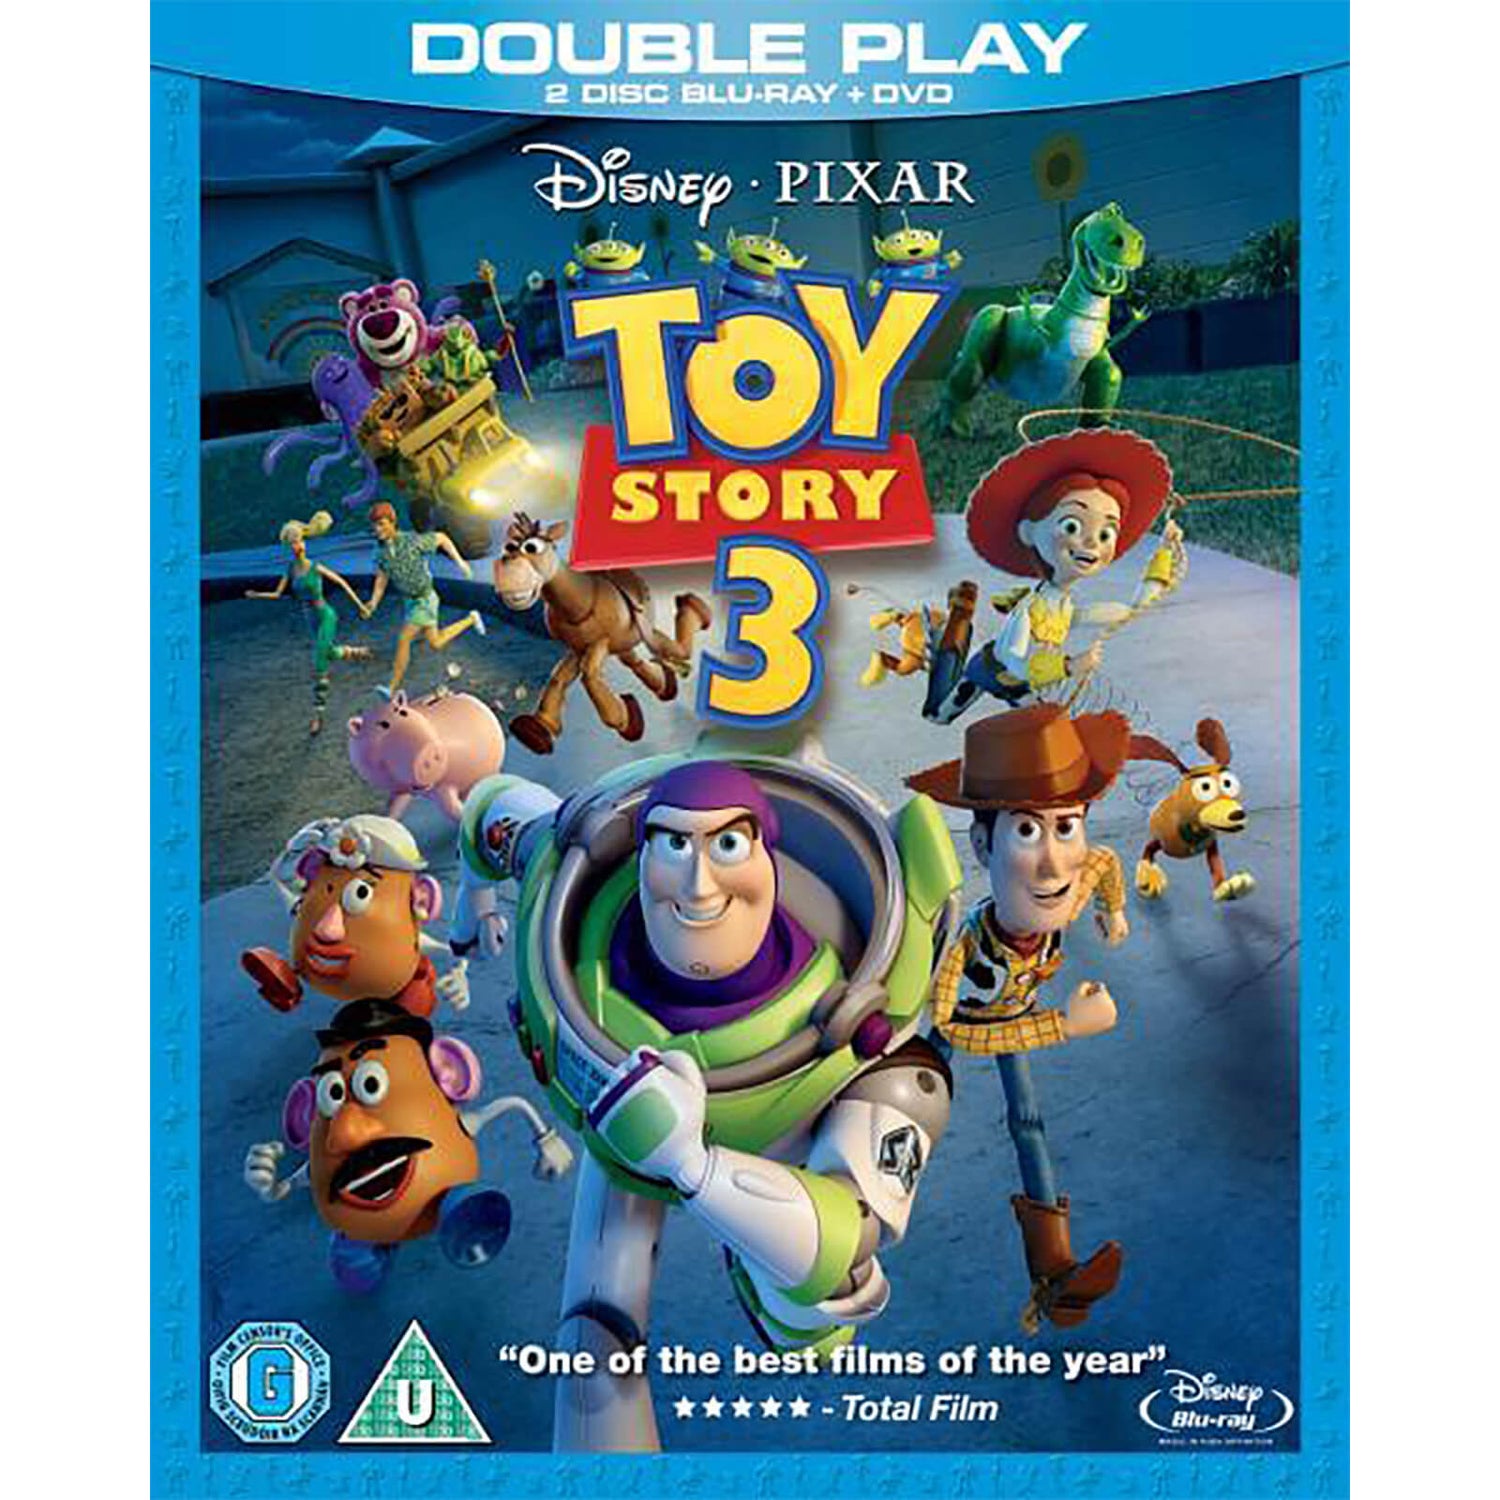 Toy Story 3: Double Play (Includes Blu-Ray and DVD Copy)